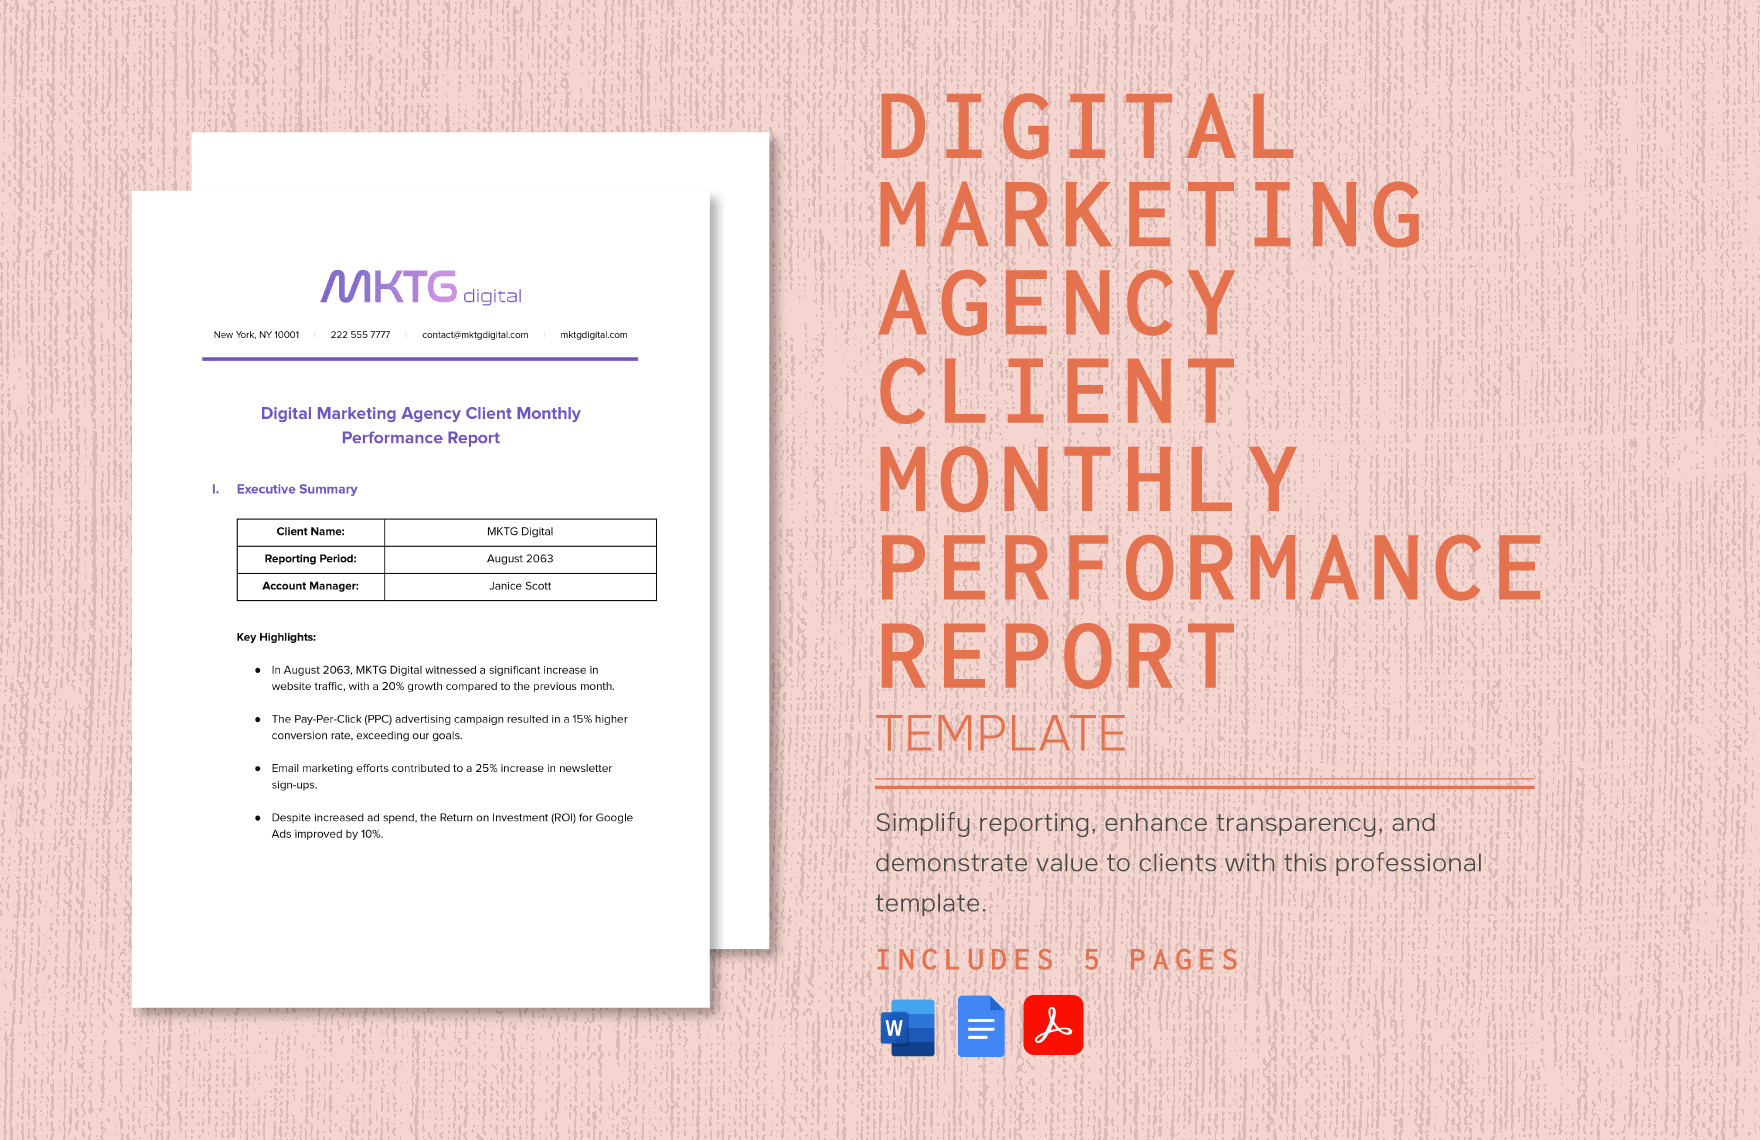 Digital Marketing Agency Client Monthly Performance Report Template